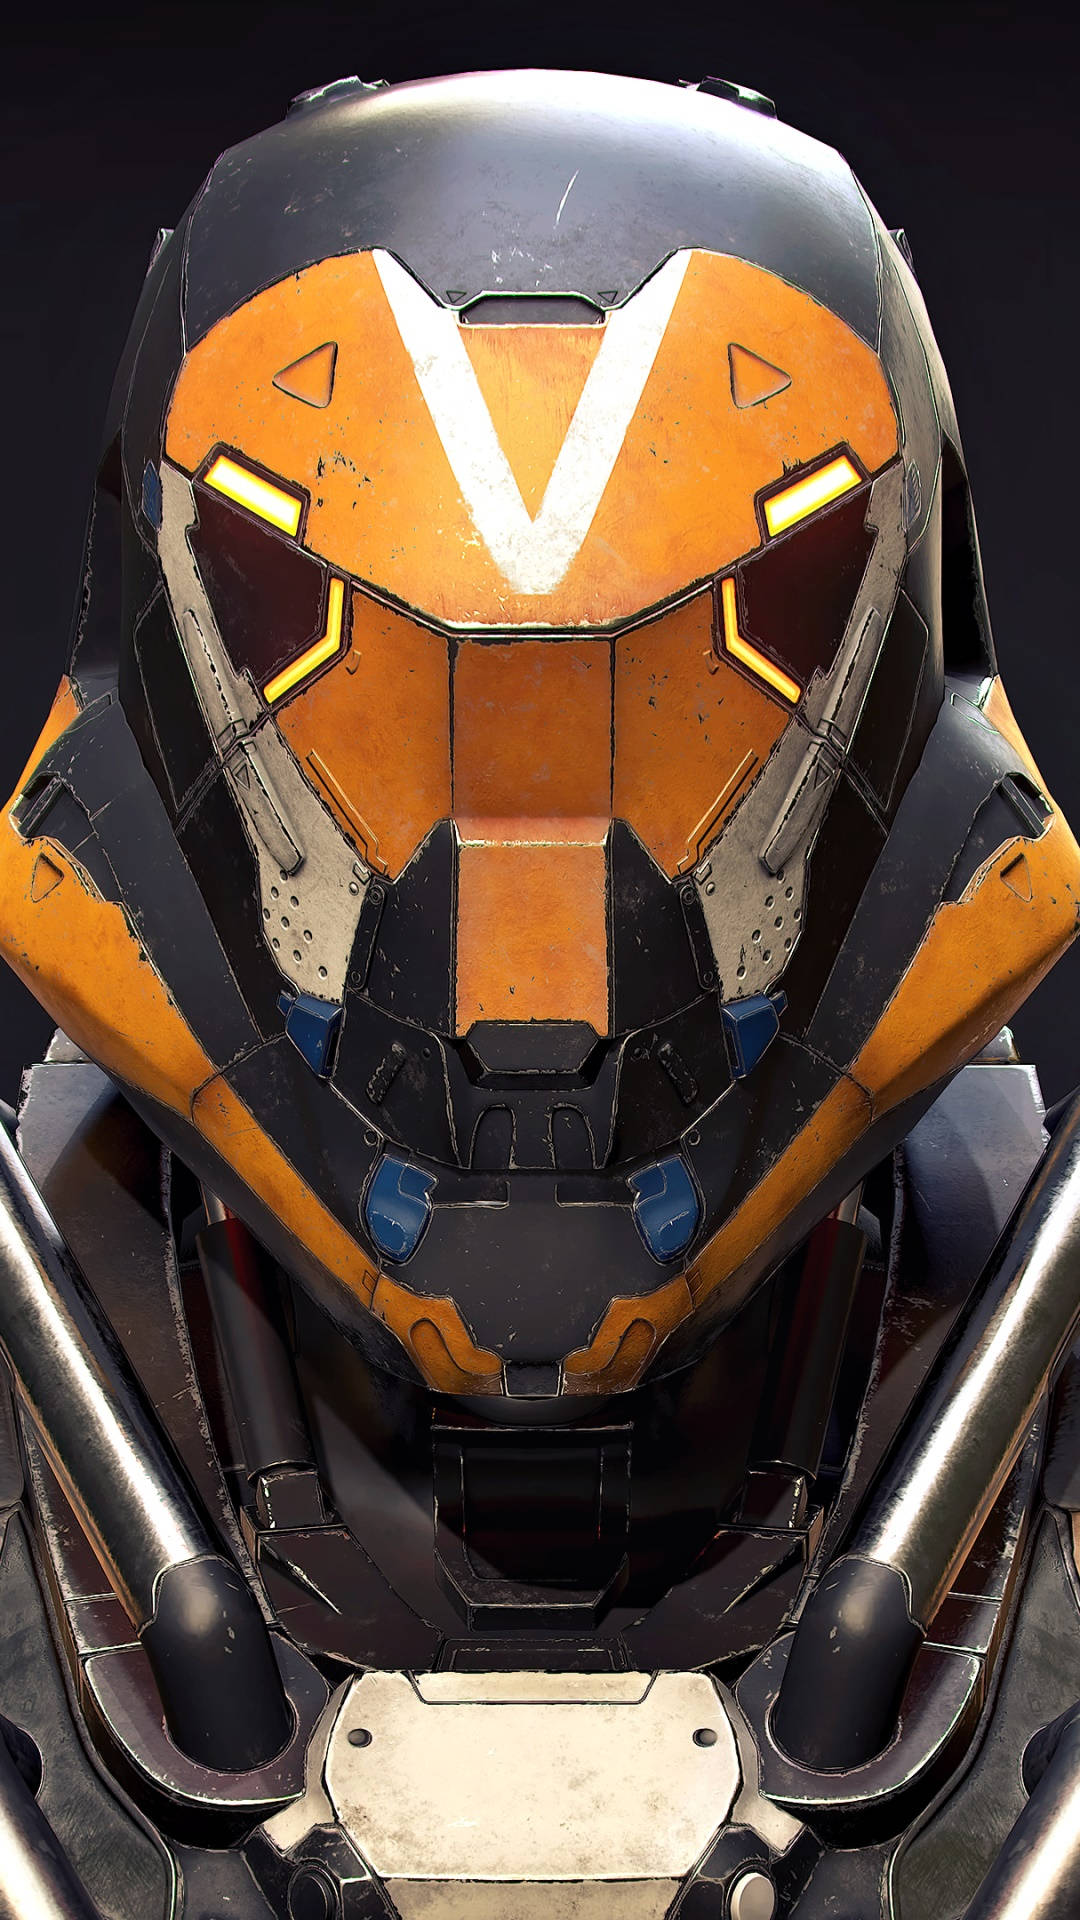 Free Anthem Phone Wallpaper Downloads, [100+] Anthem Phone Wallpapers for  FREE 